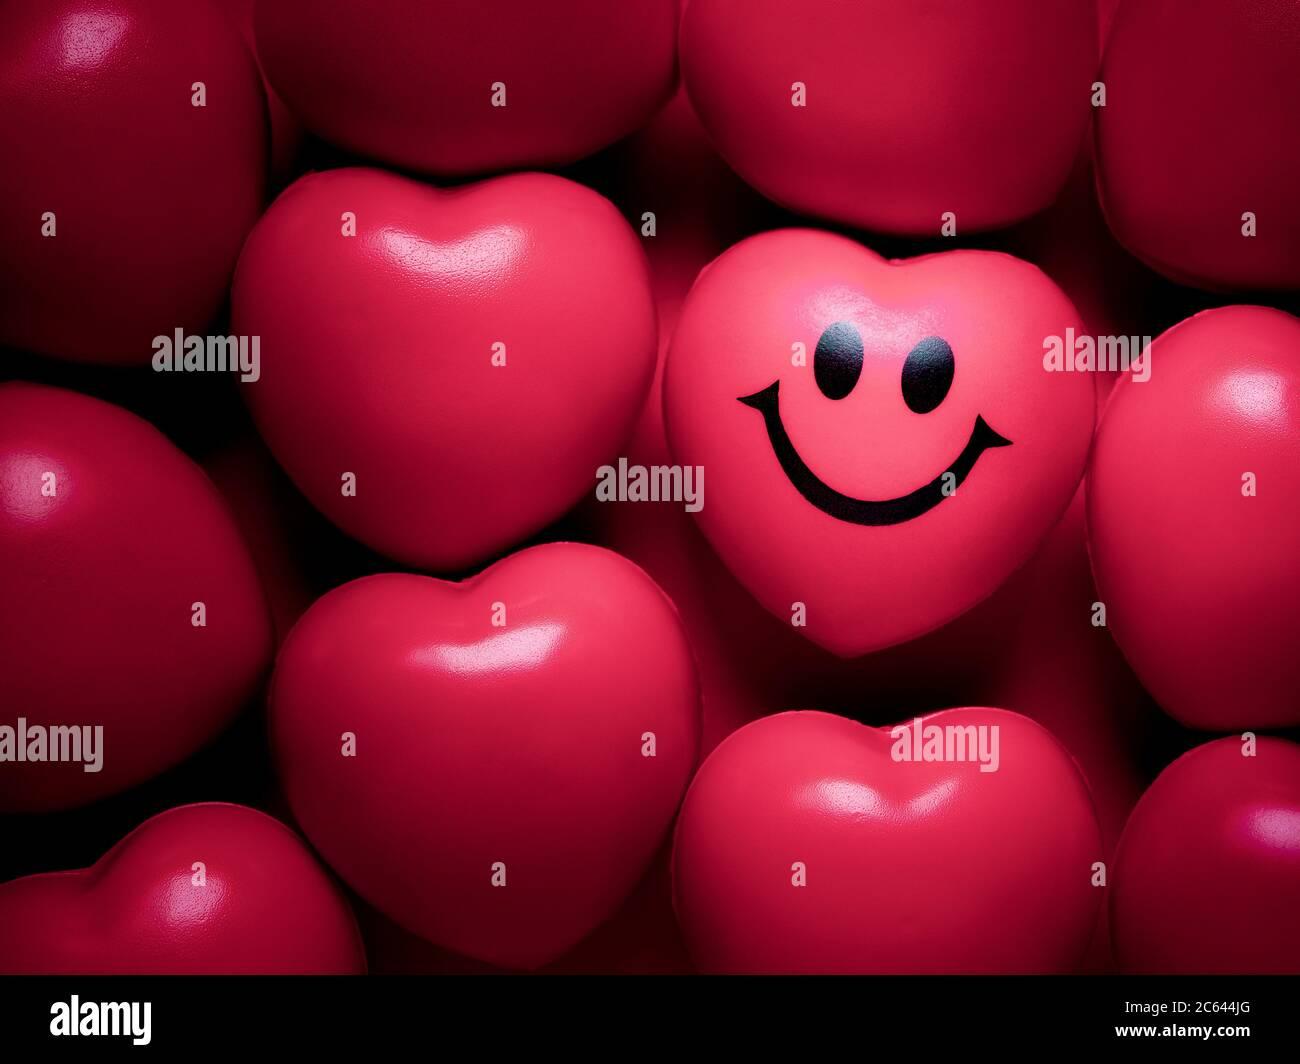 Hearts Background Pink Heart With Happy And Smiling Face Among